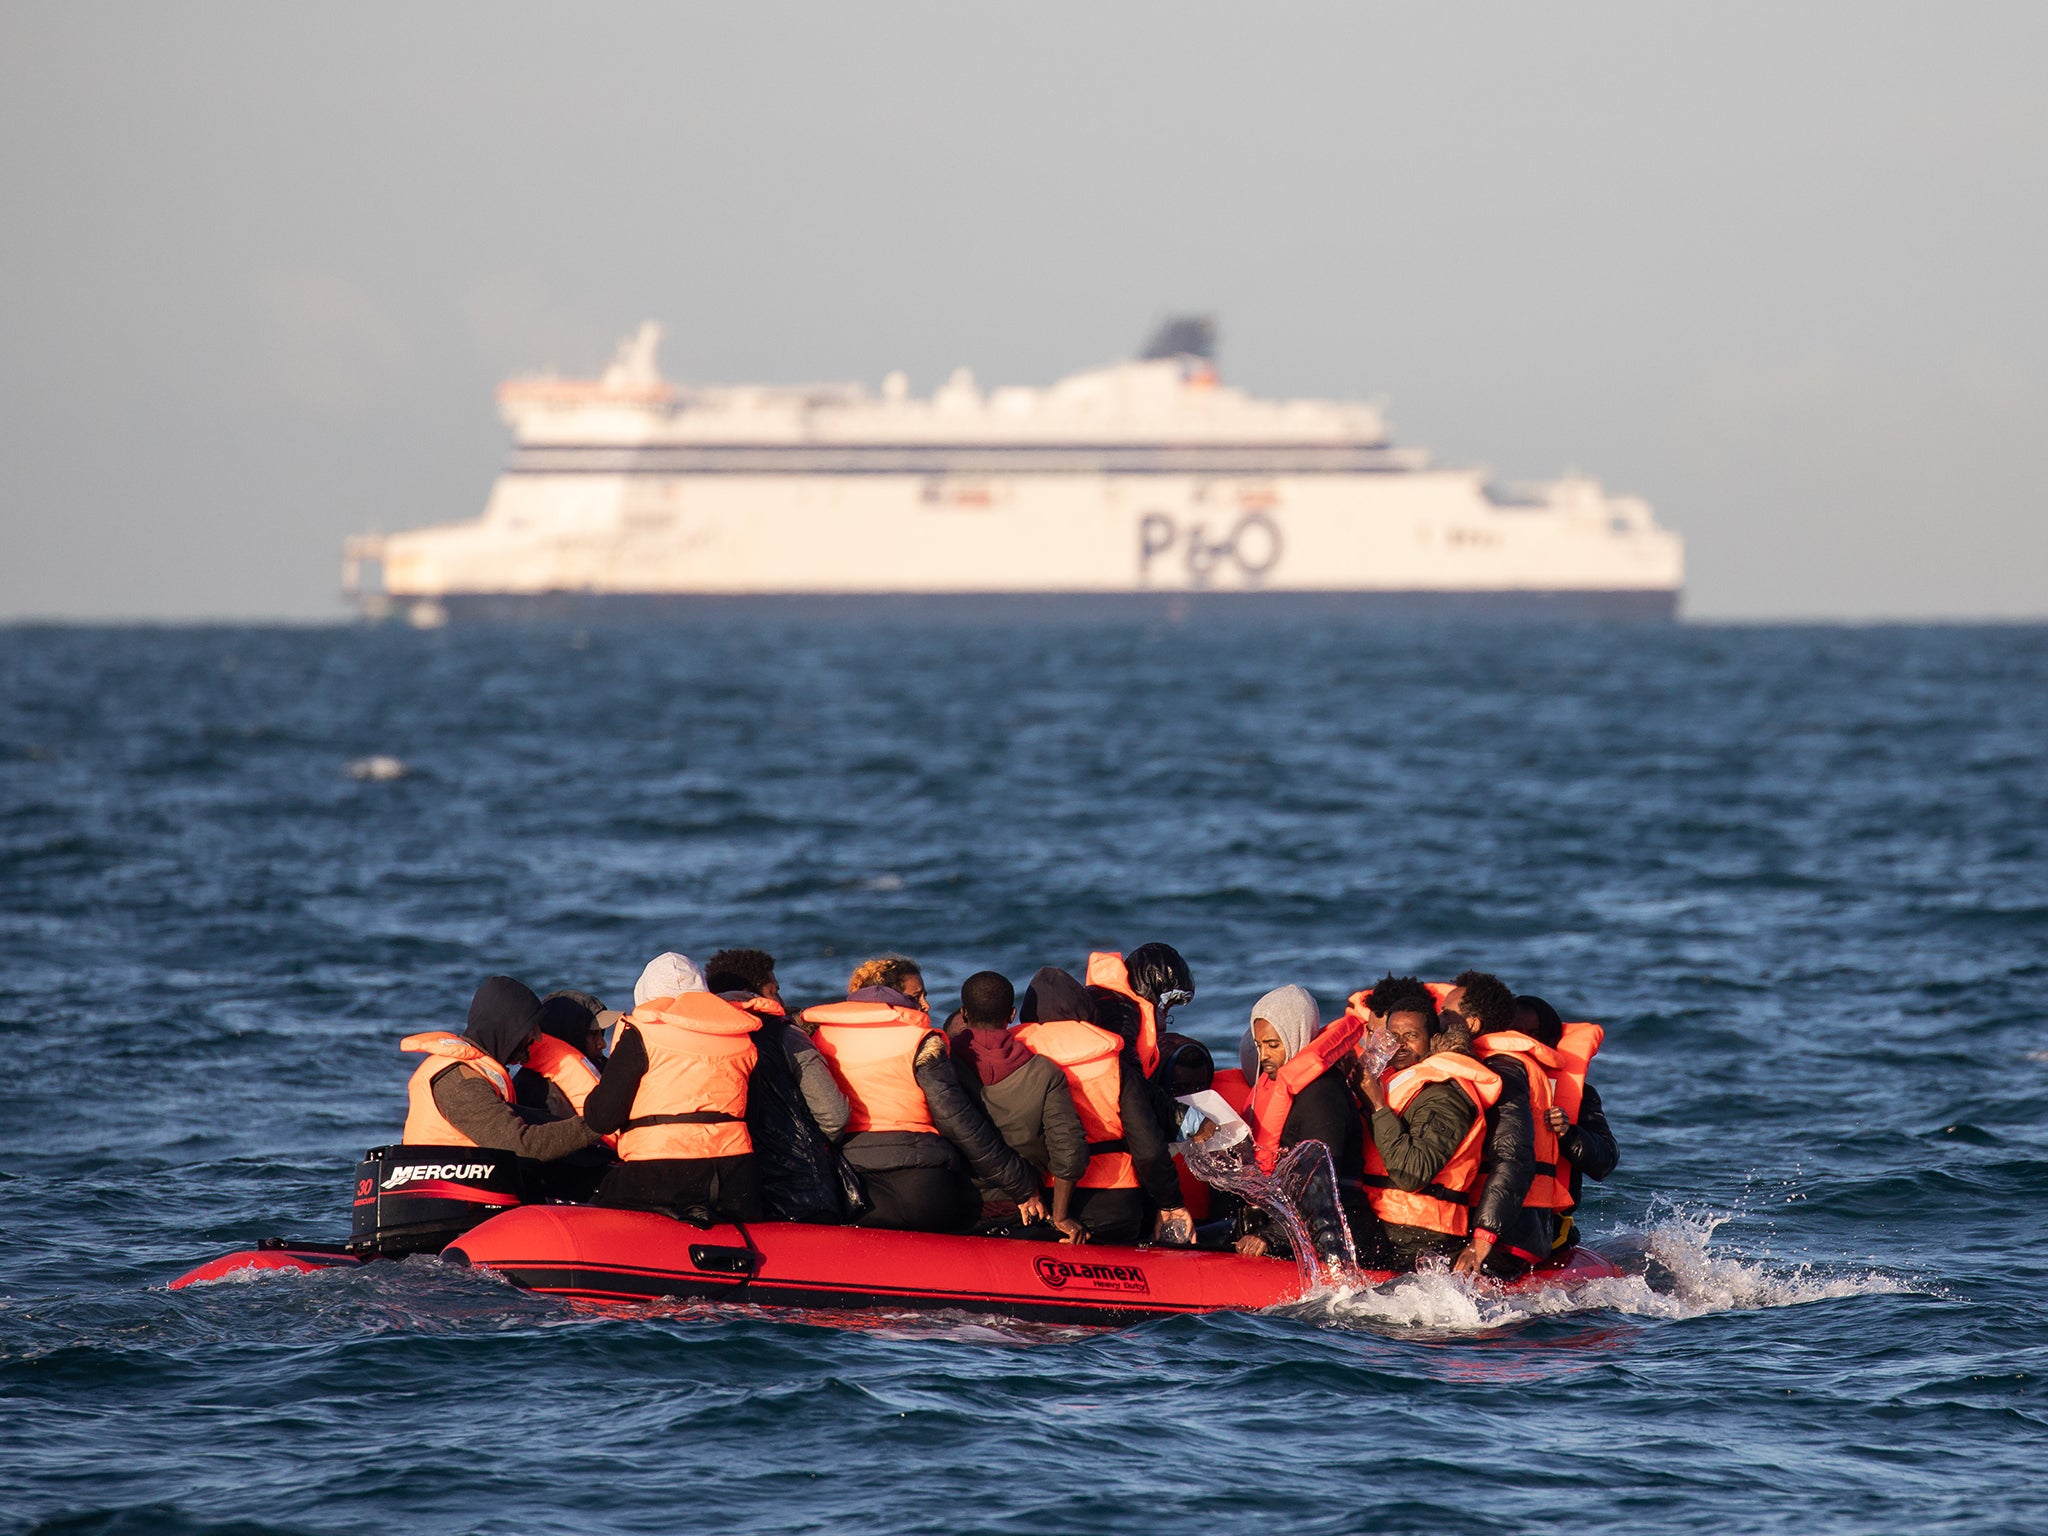 Deterrents without safe routes do not reduce irregular arrivals of asylum seekers